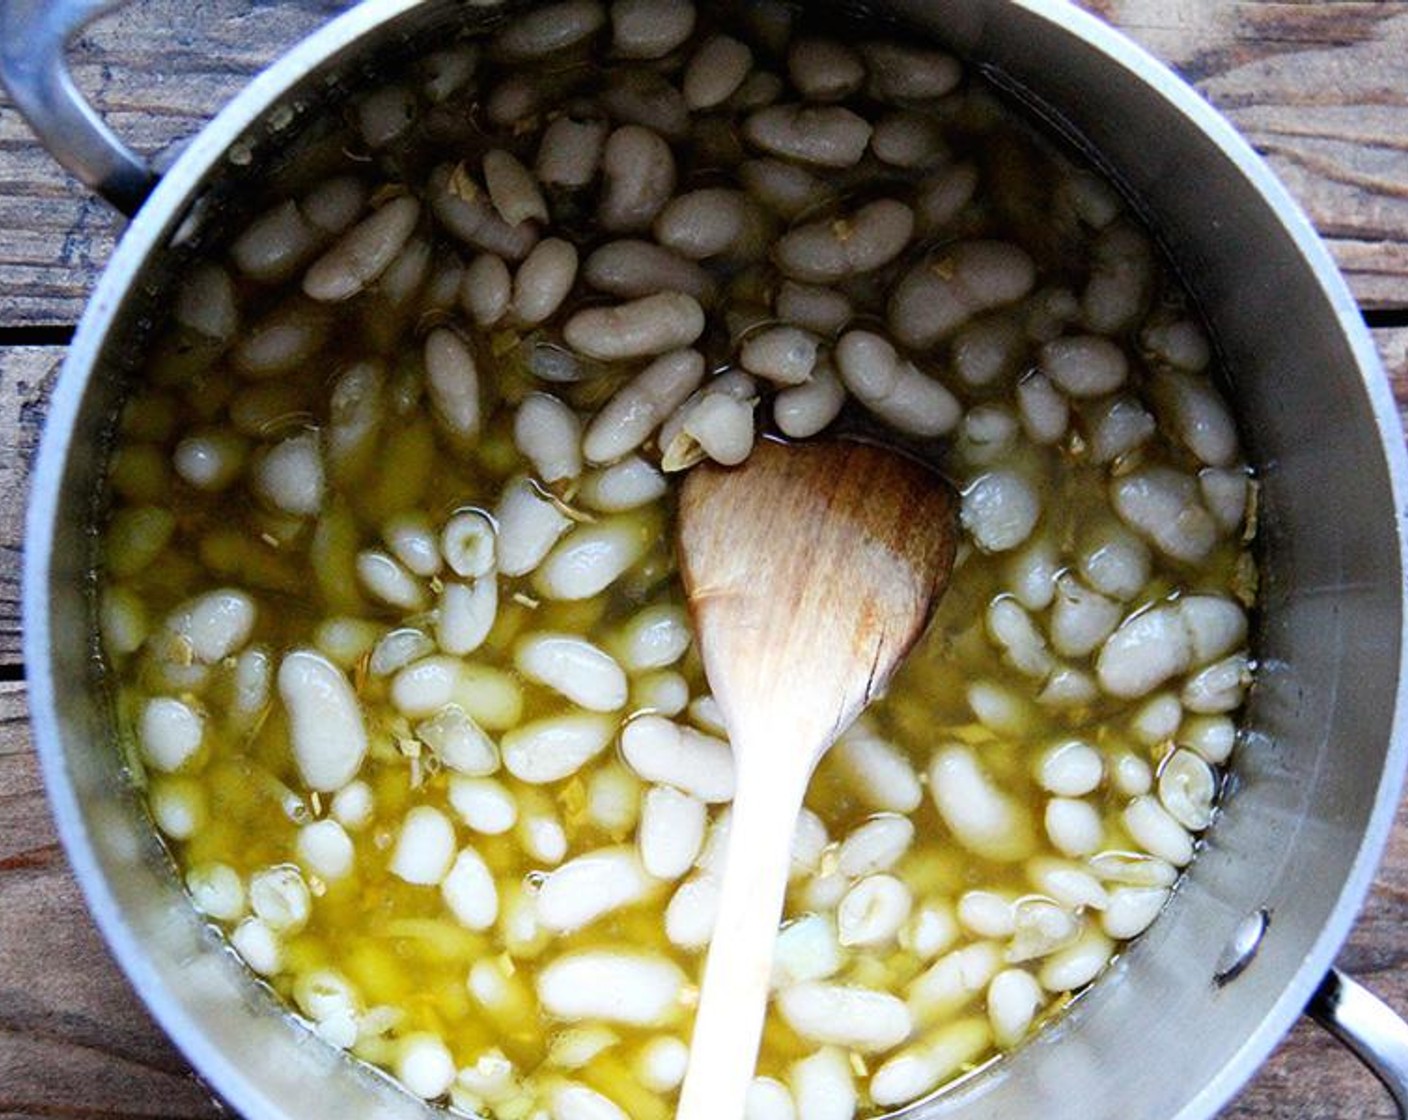 step 2 Add the Canned Cannellini White Kidney Beans (3 cups), Salt (to taste), and Ground Black Pepper (to taste). Turn the heat to low, cover and simmer gently for 5-6 minutes.